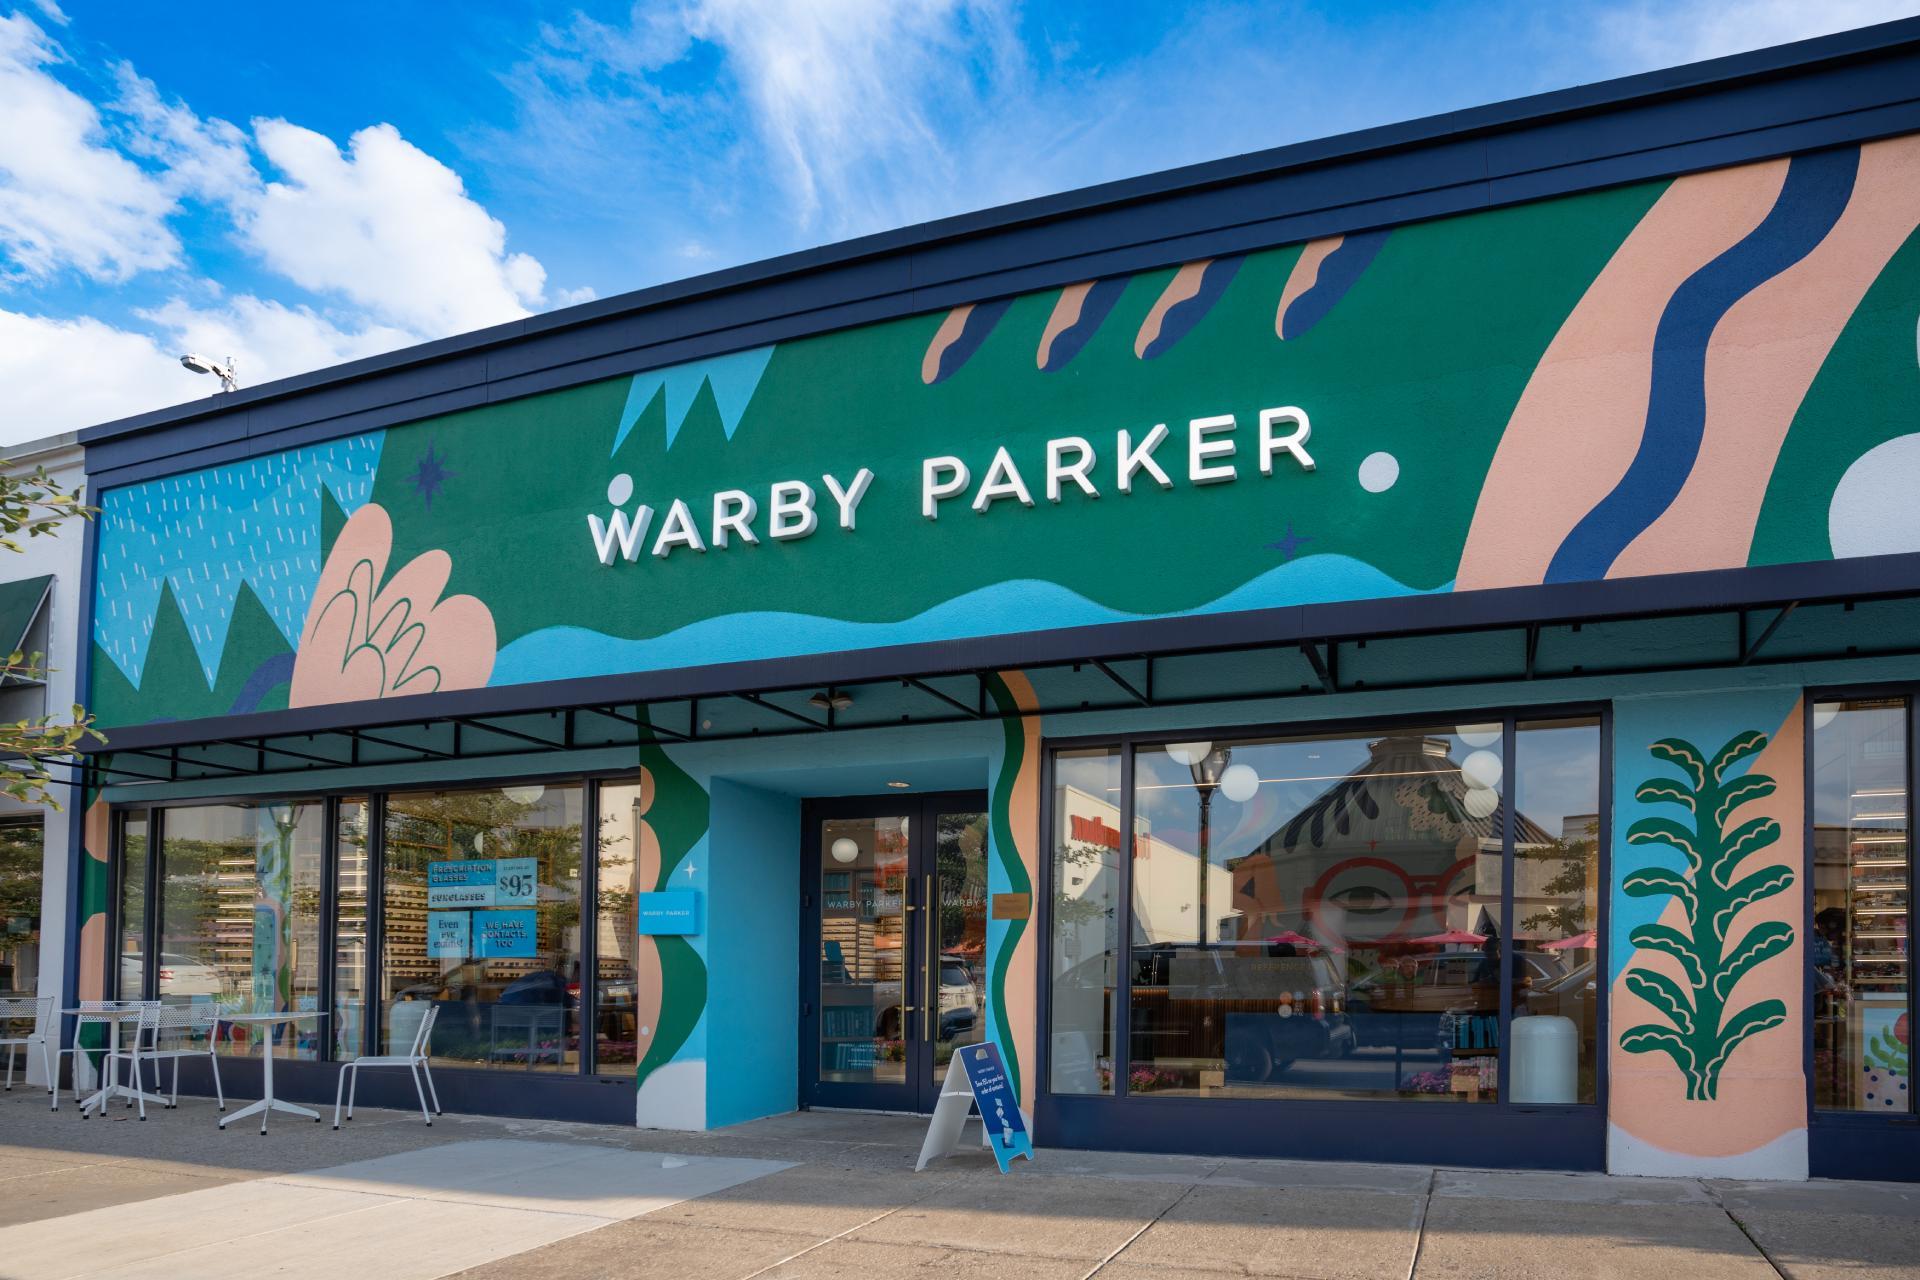 The fashionable Warby Parker eyewear store in Suburban Square with a color mural on the façade